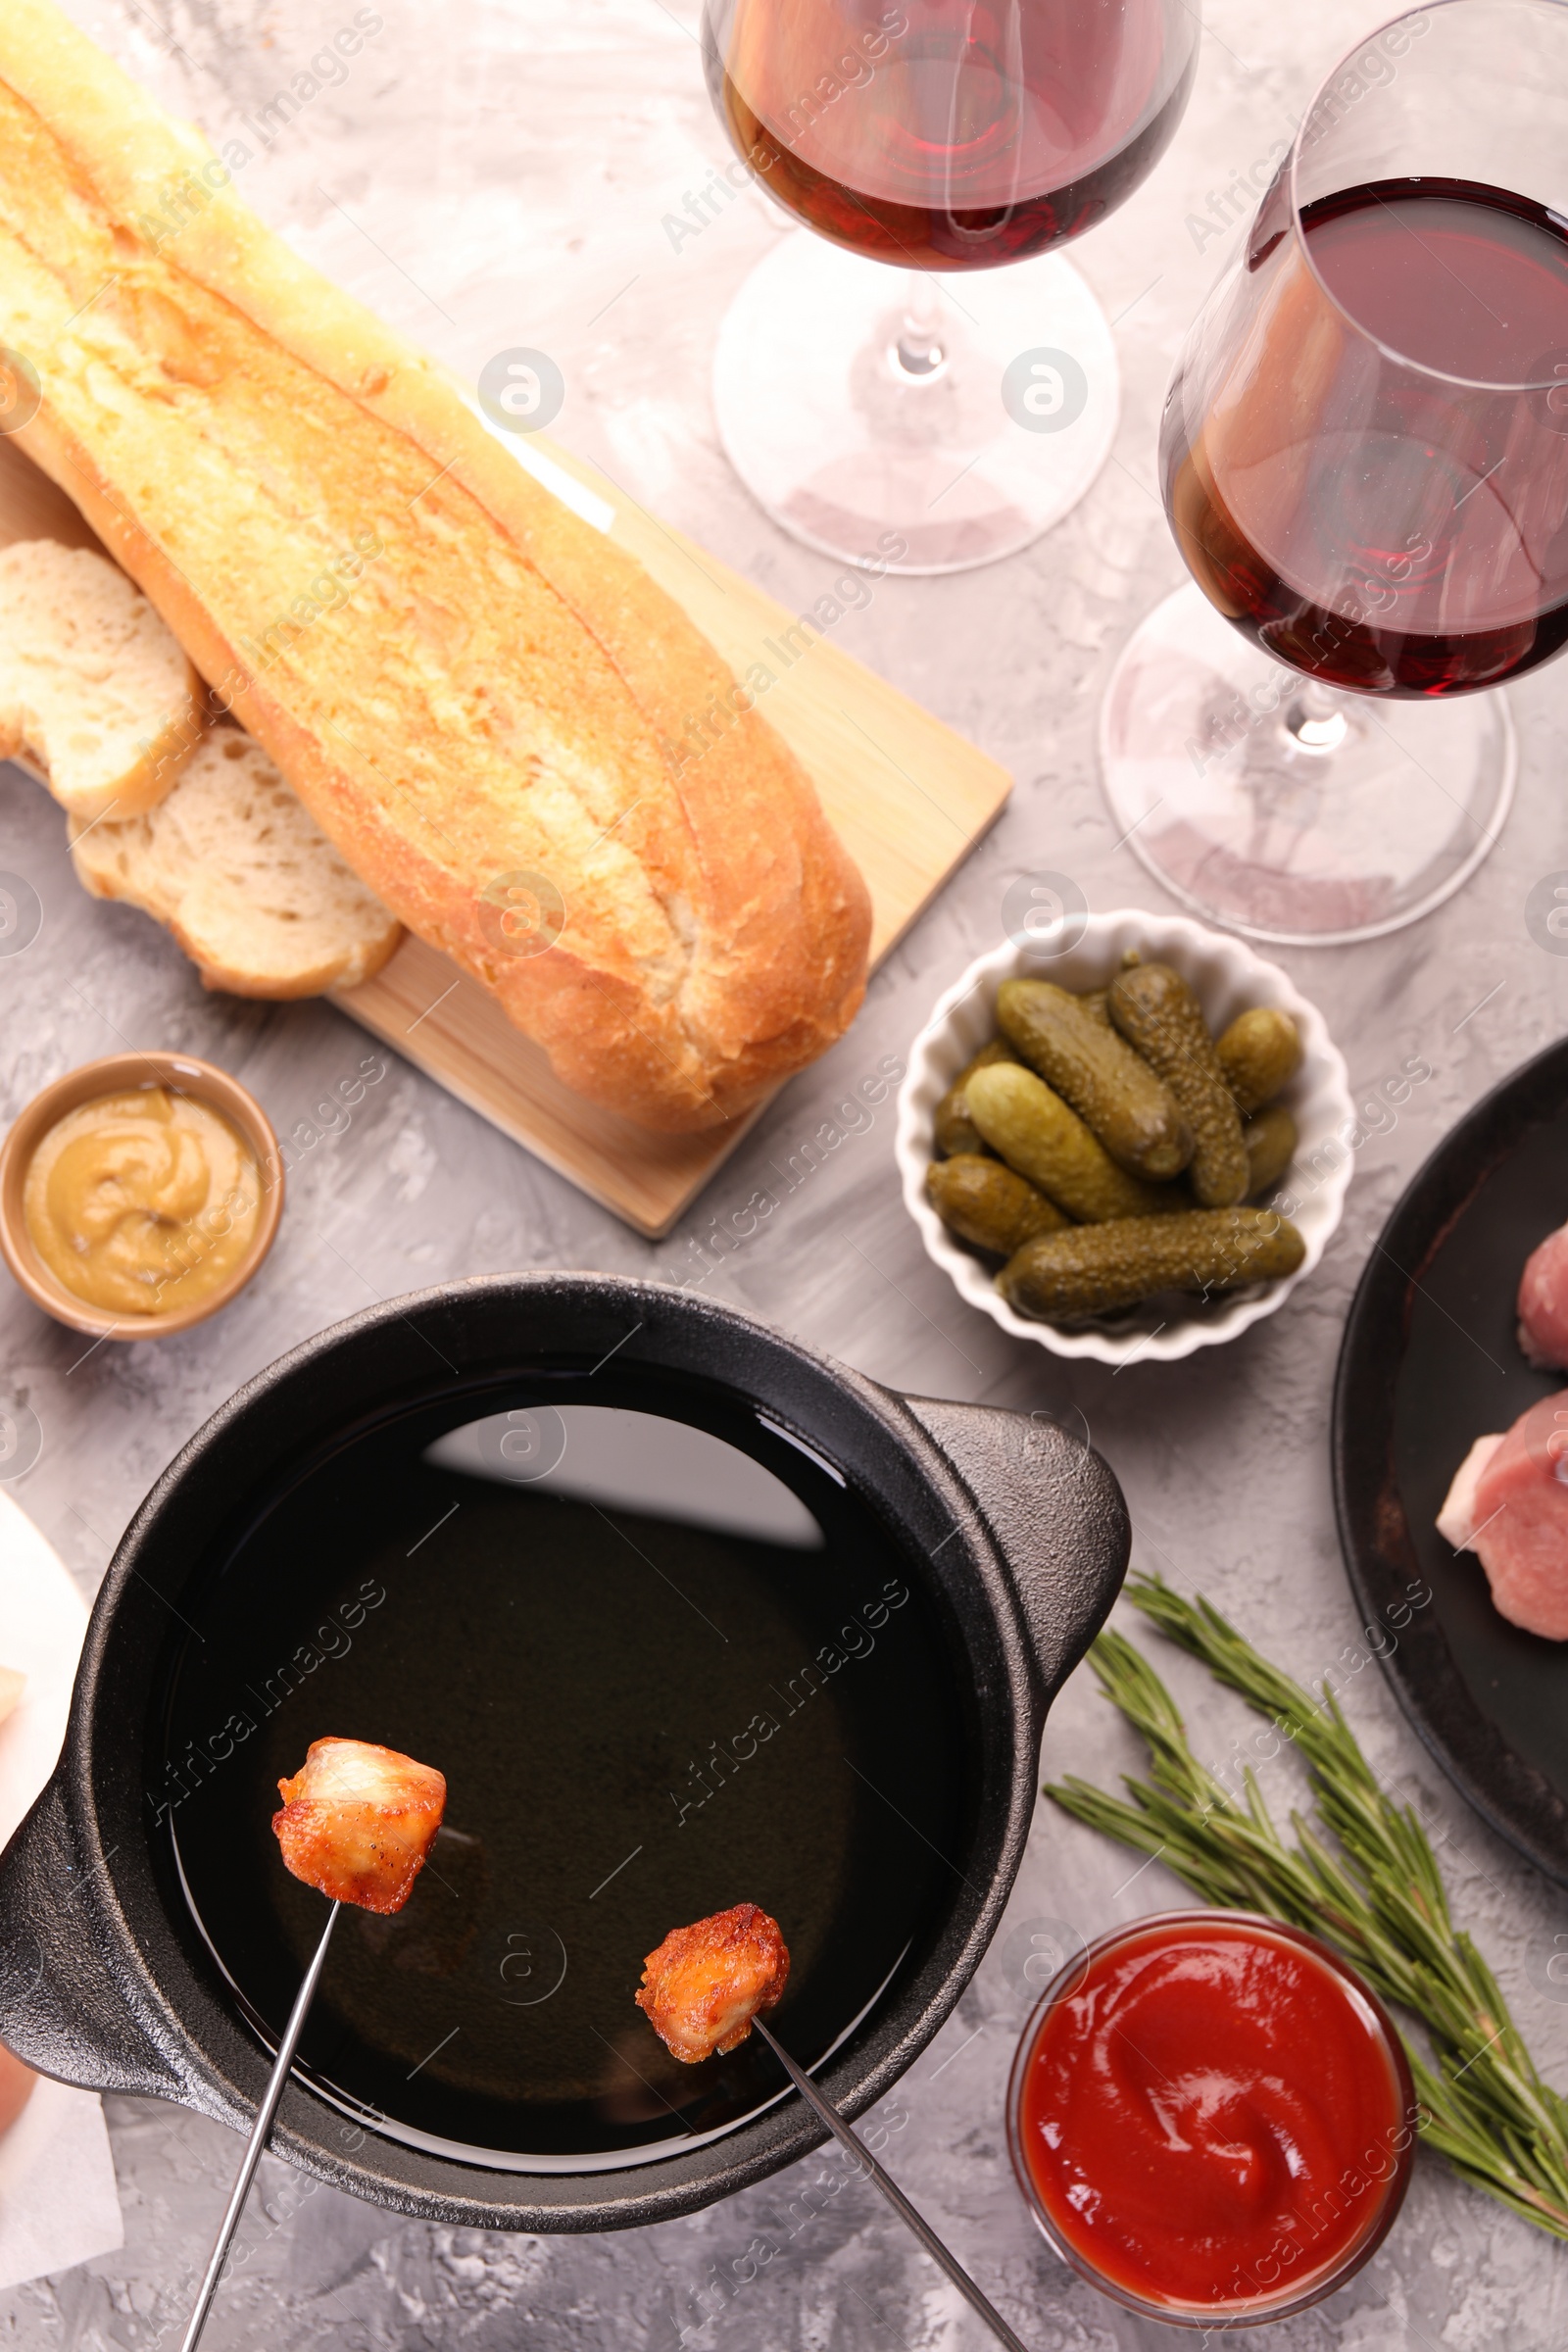 Photo of Fondue pot, forks with fried meat pieces, glasses of red wine and other products on grey textured table, flat lay